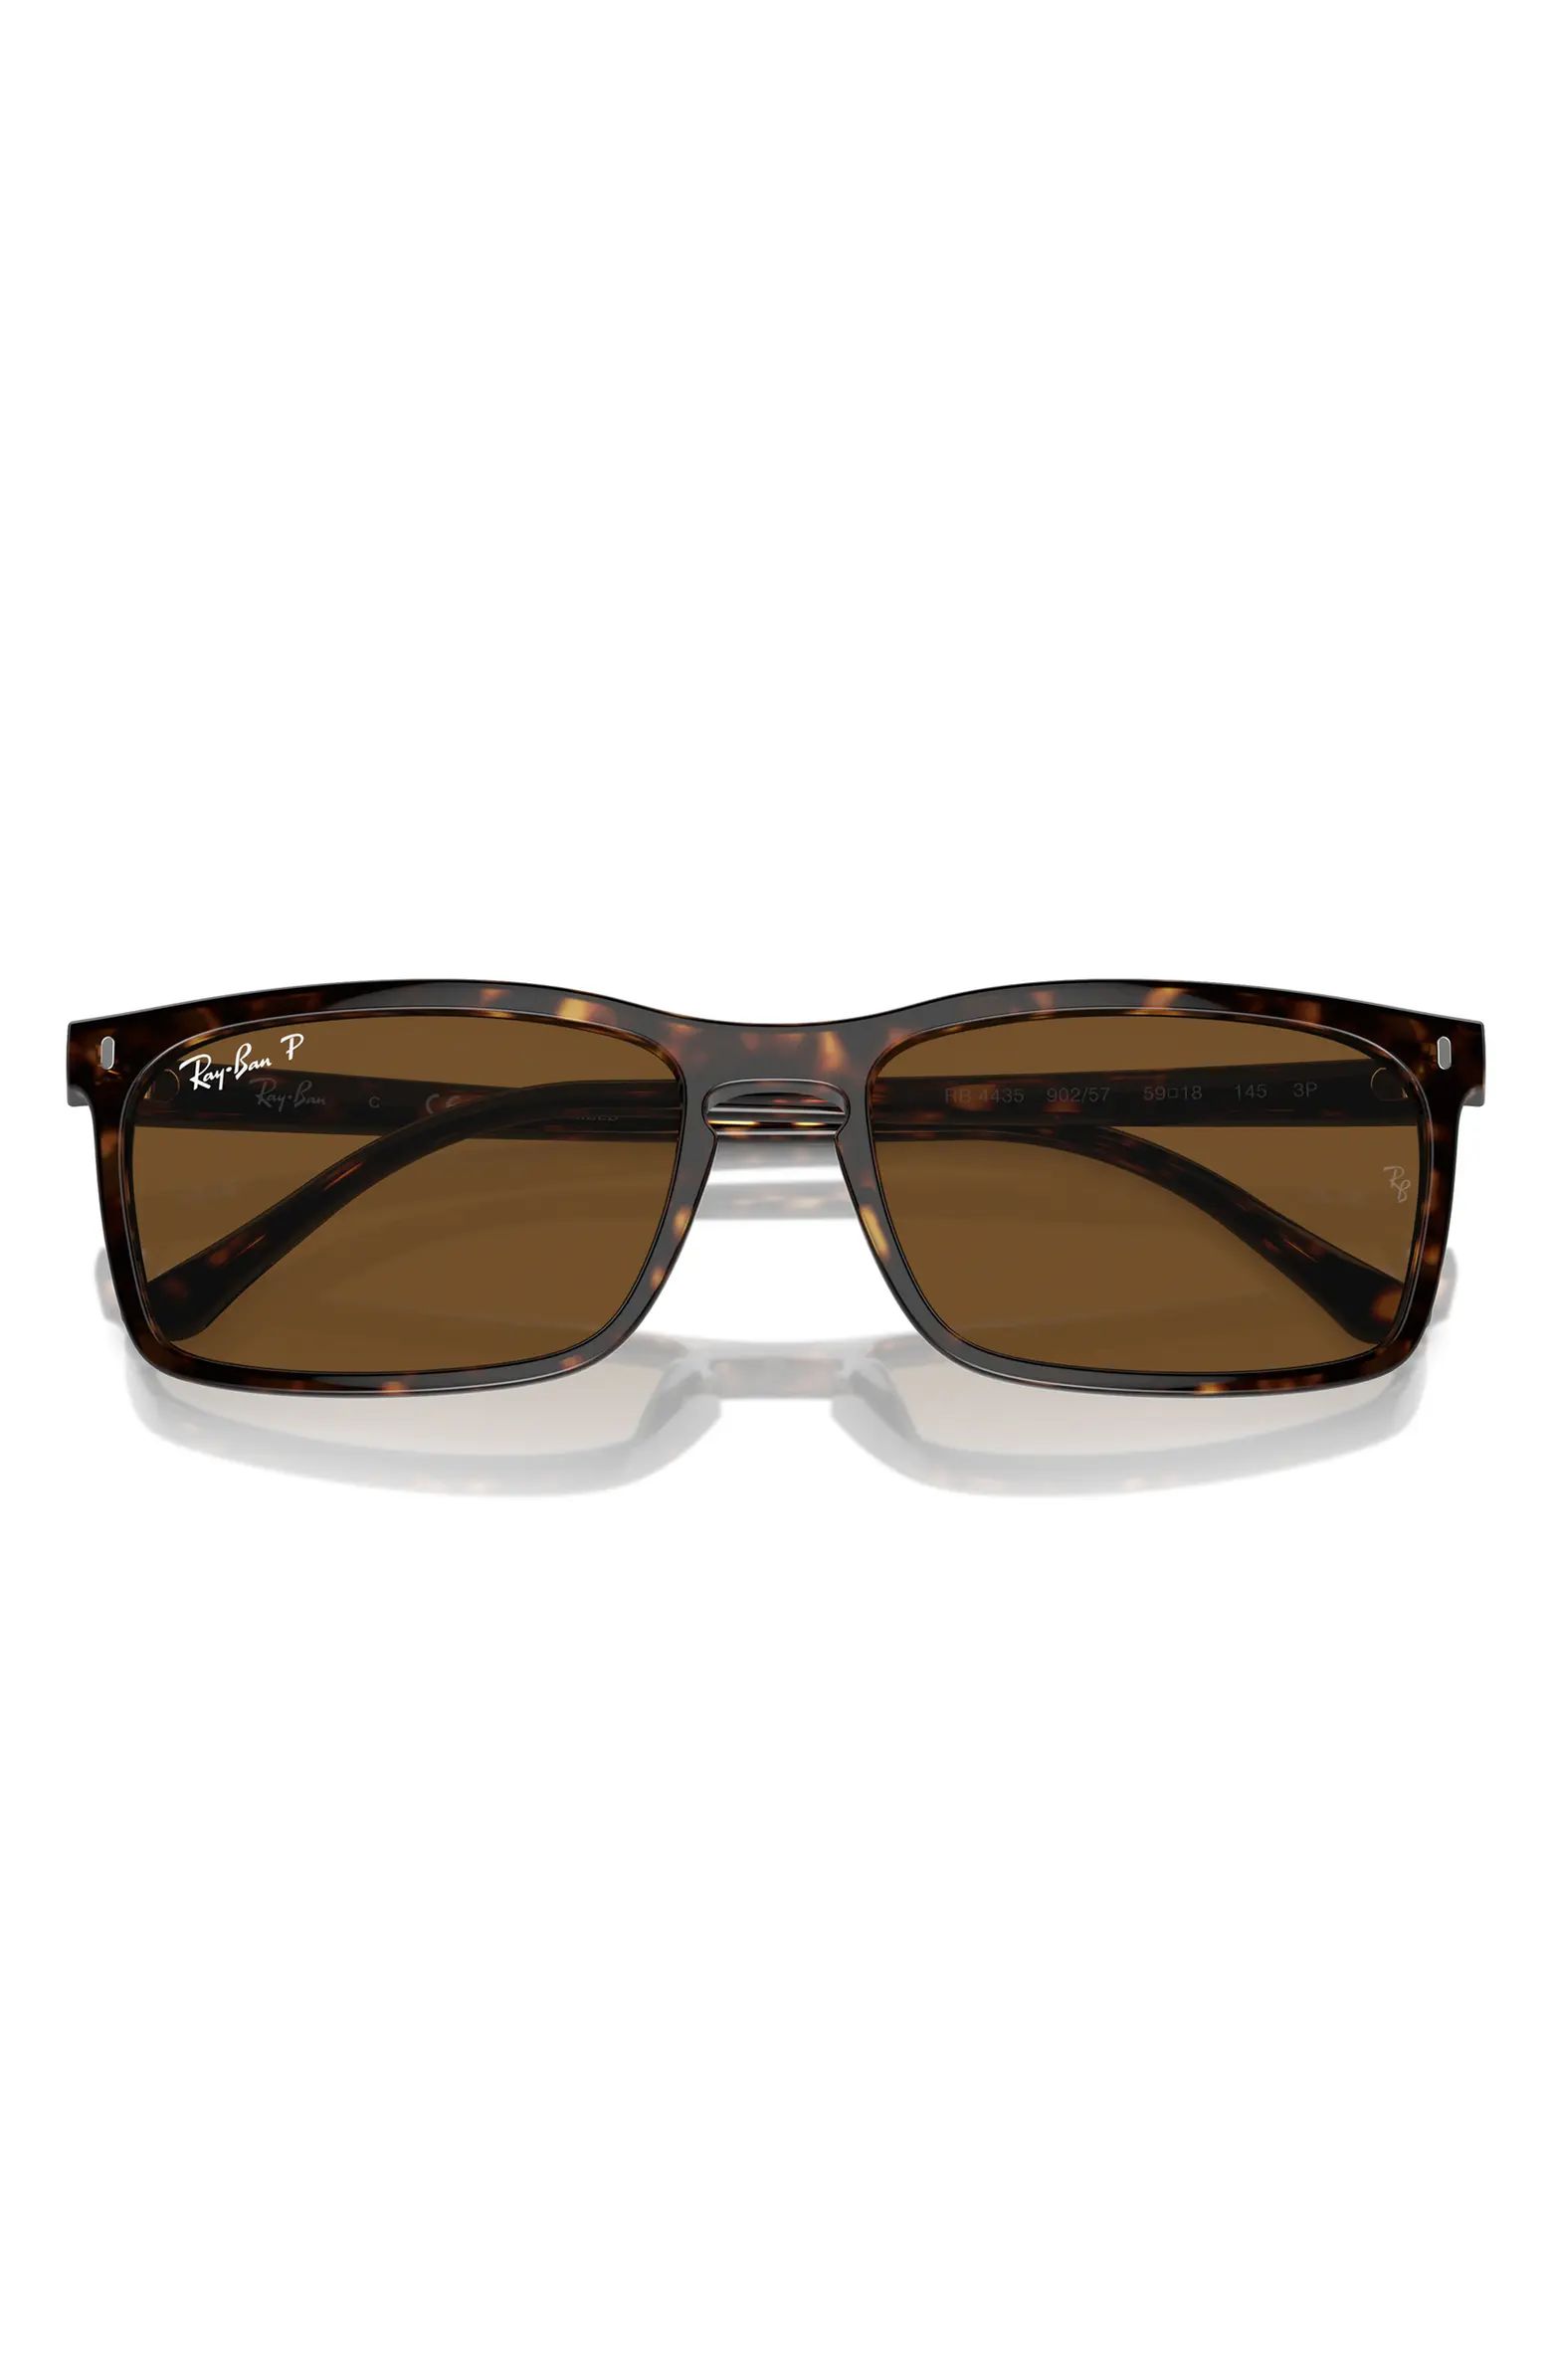 Ray-Ban | Nordstrom